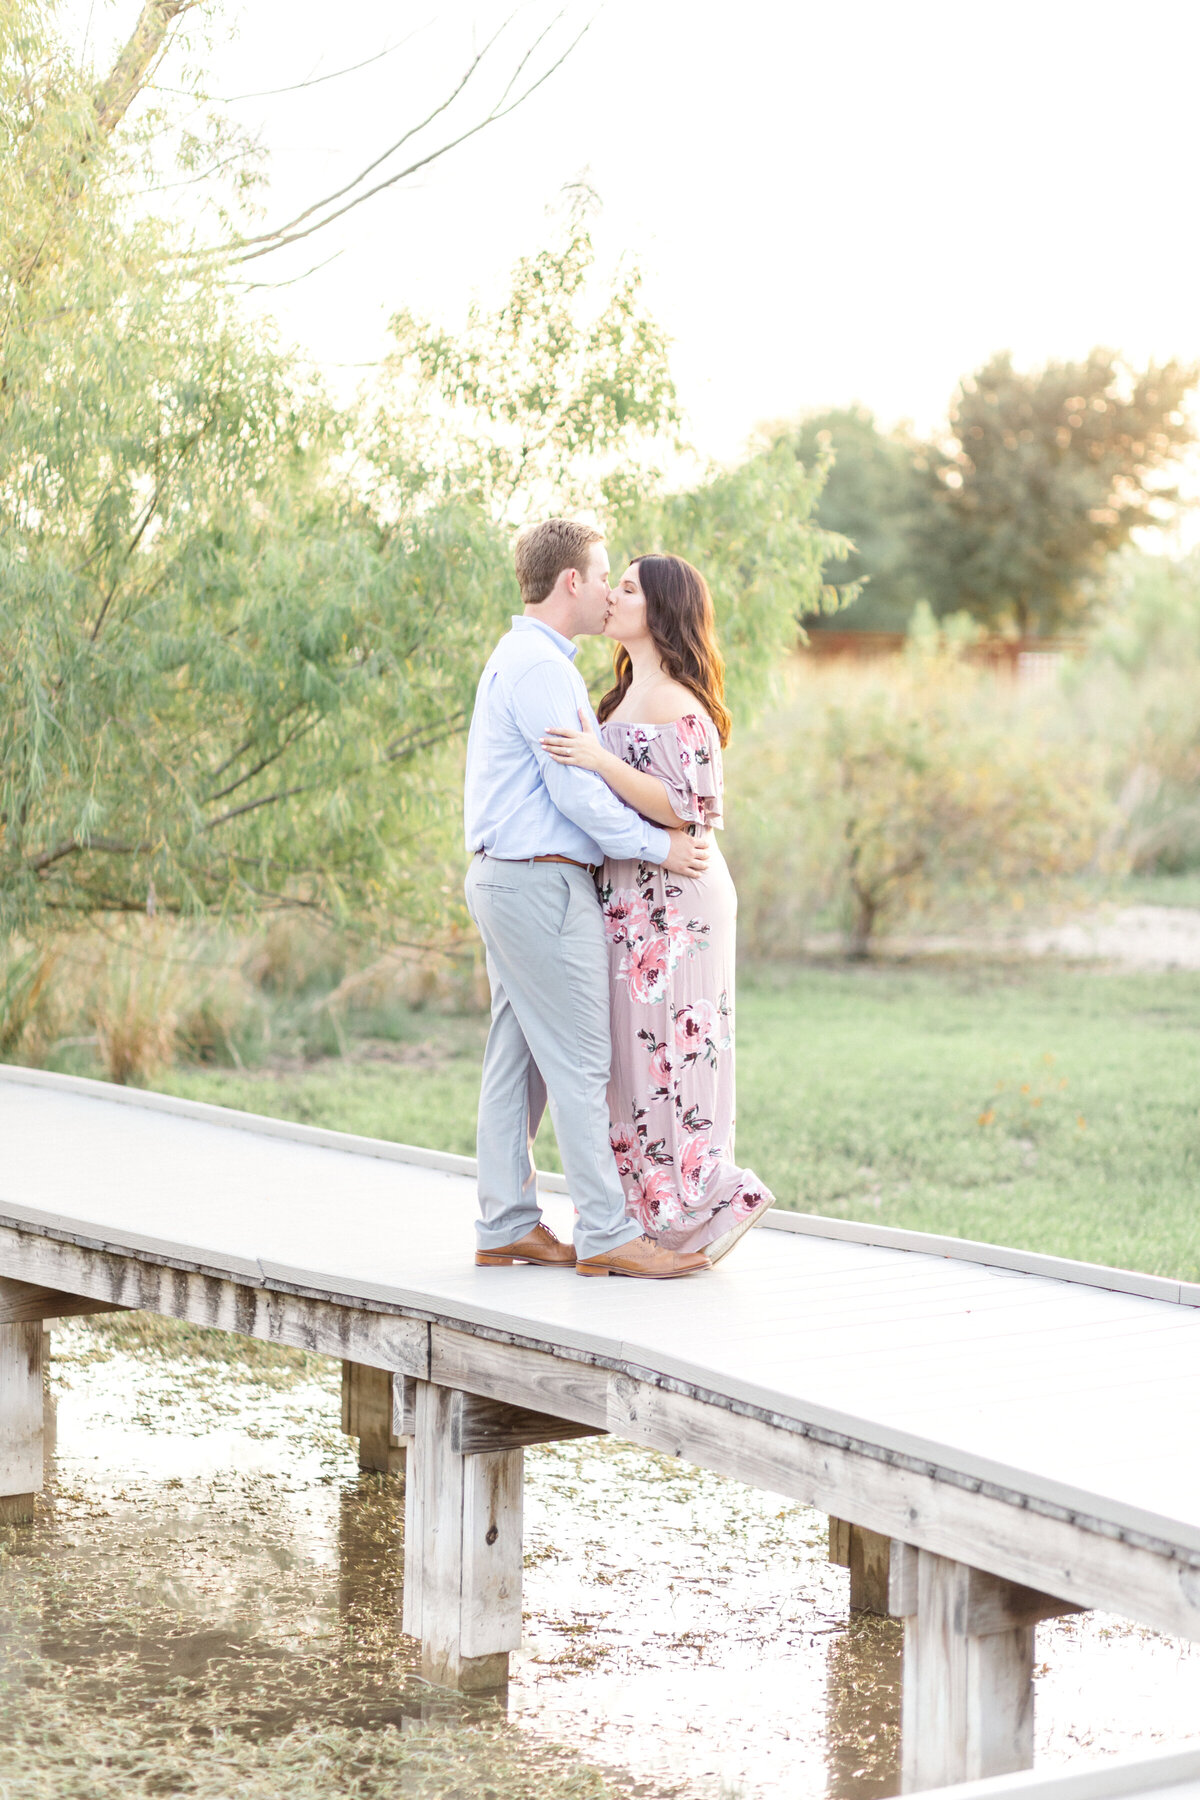 Jessica Chole Photography San Antonio Texas California Wedding Portrait Engagement Maternity Family Lifestyle Photographer Souther Cali TX CA Light Airy Bright Colorful Photography13